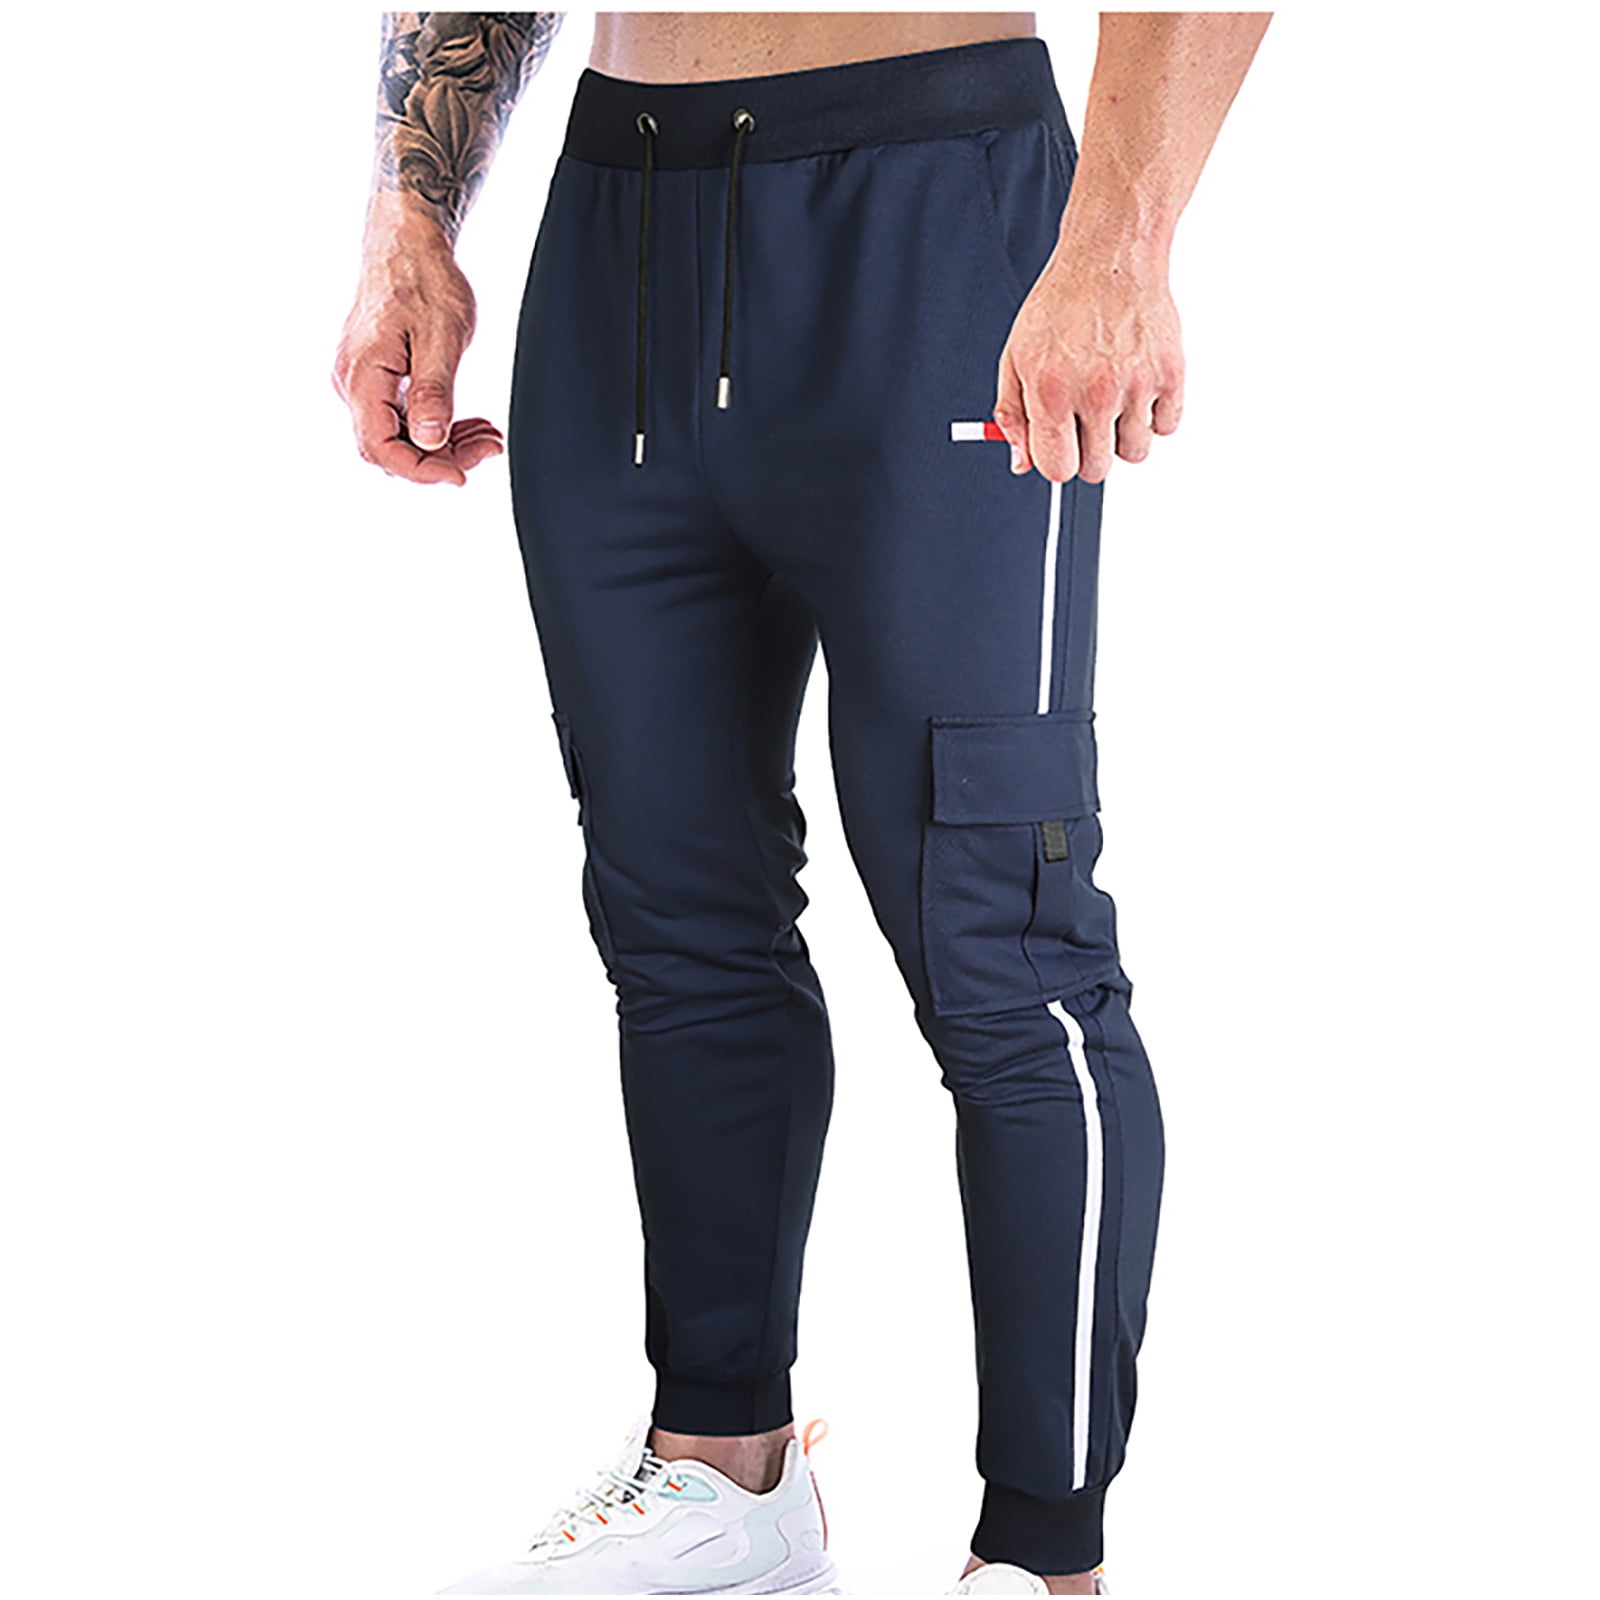 Men's Jogger Zipper Pants Athletic Gym Workout Track Pants Slim Fit Tapered  Lightweight Sweatpants with Pockets 